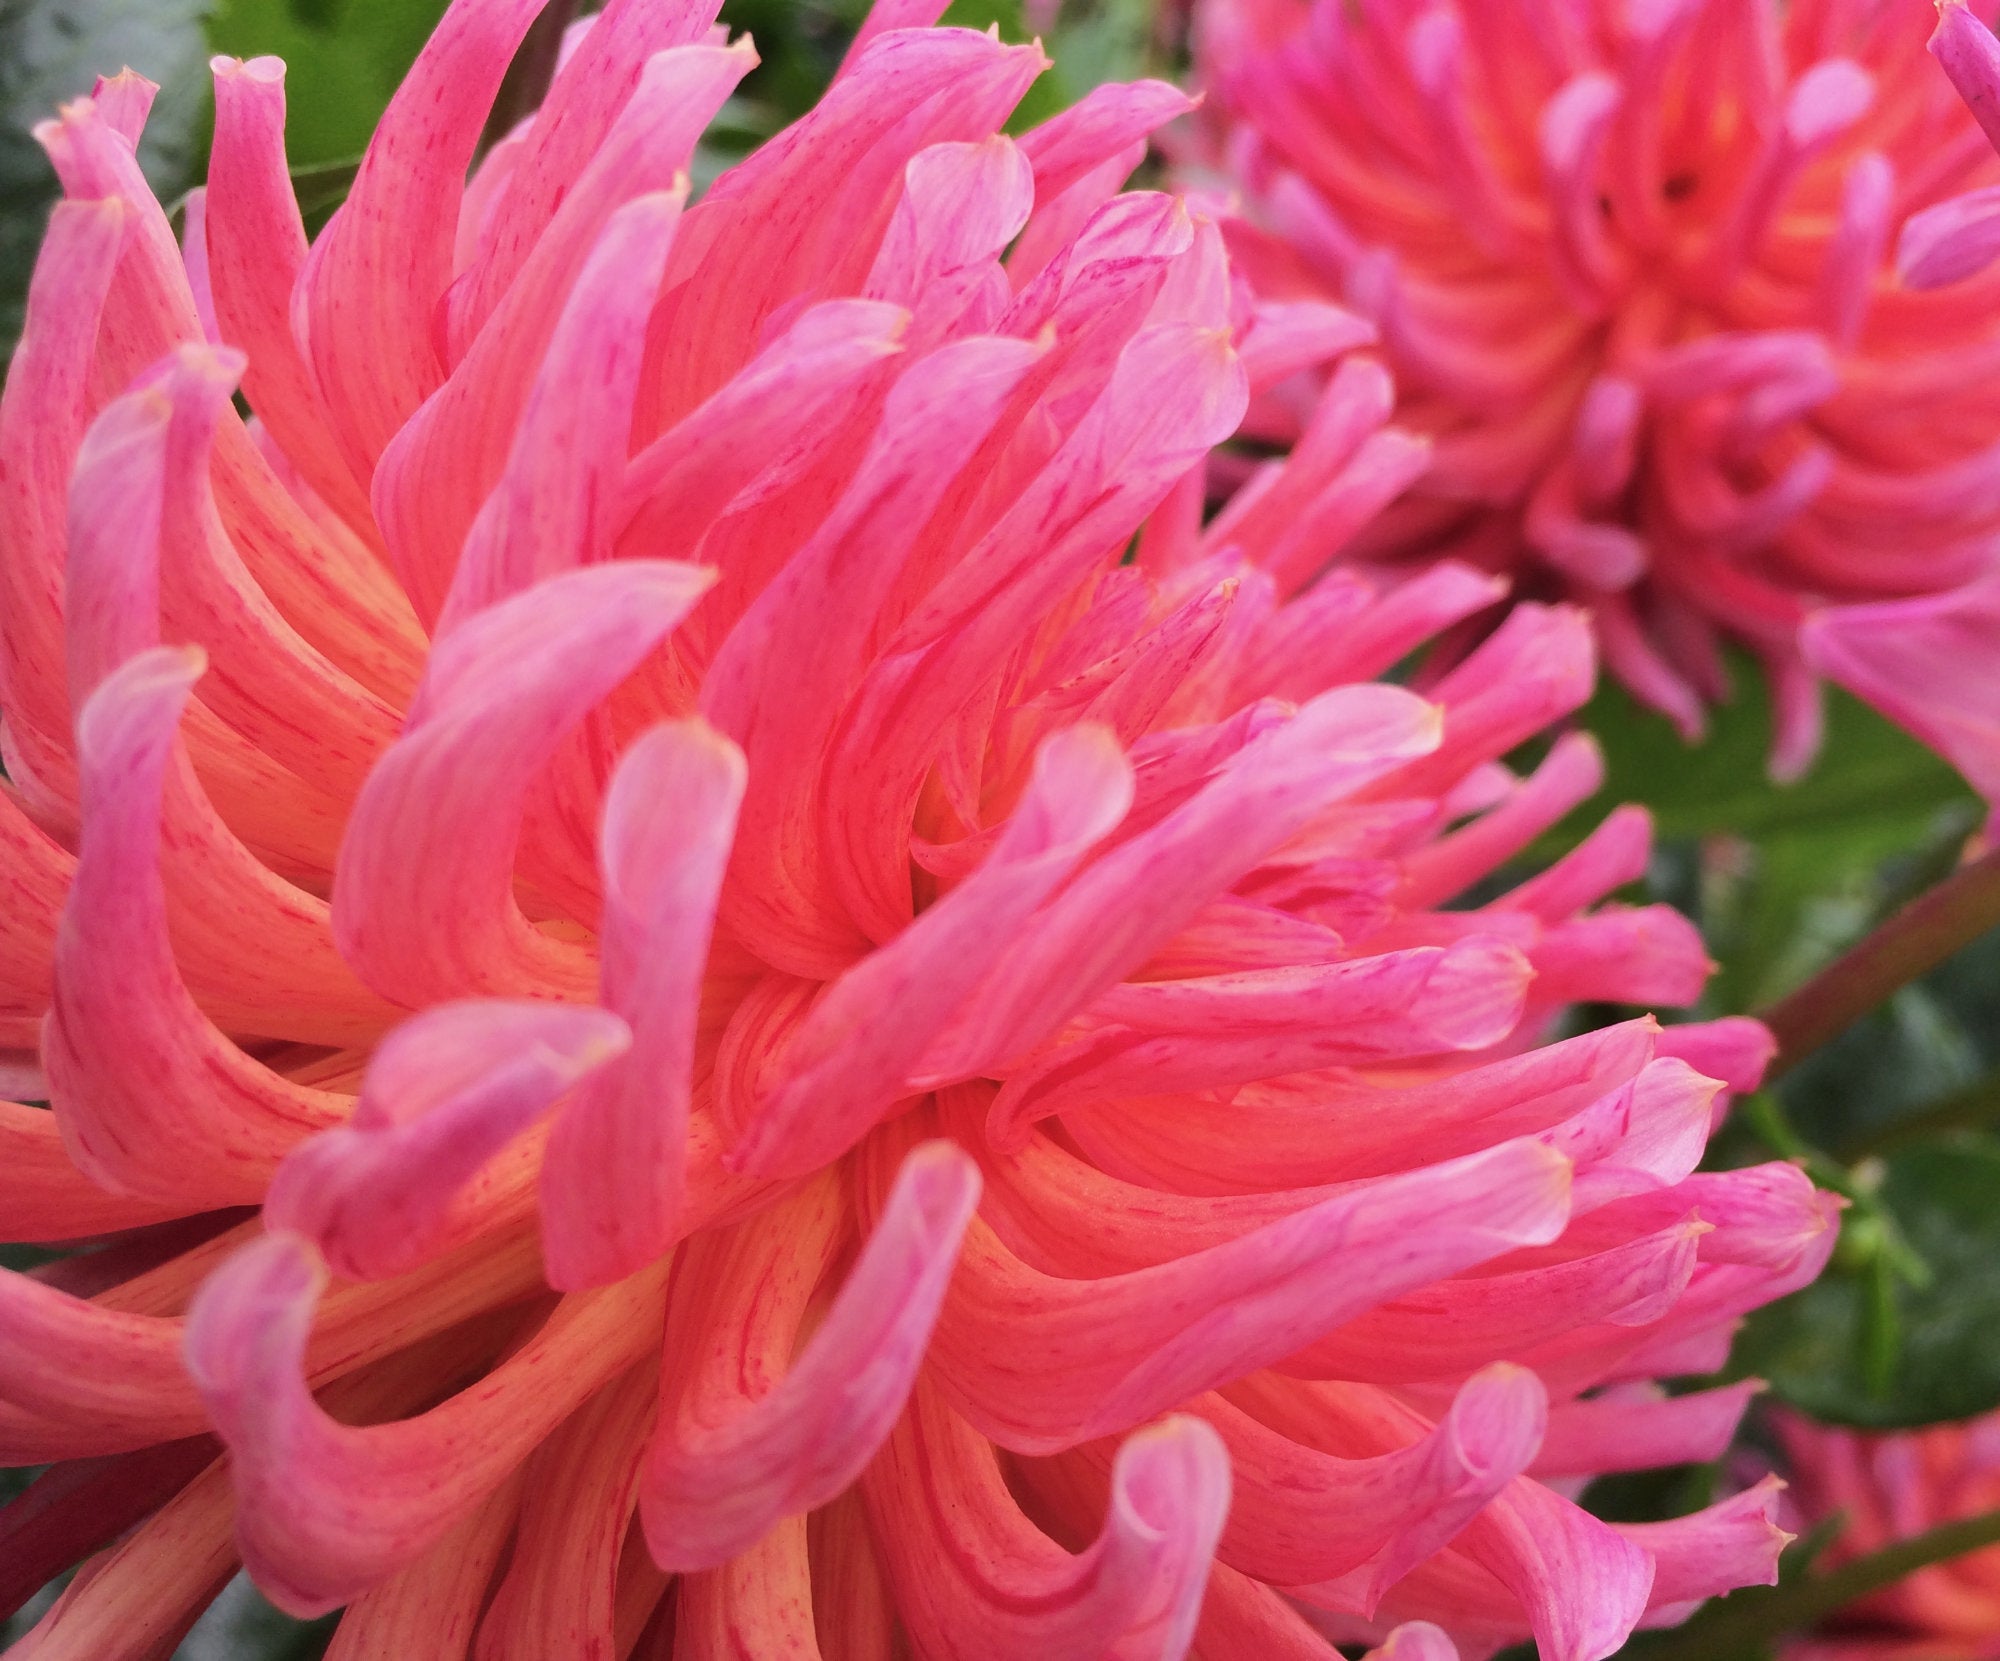 A bright pink dahlia, shown up close, with another pink bloom in the background.